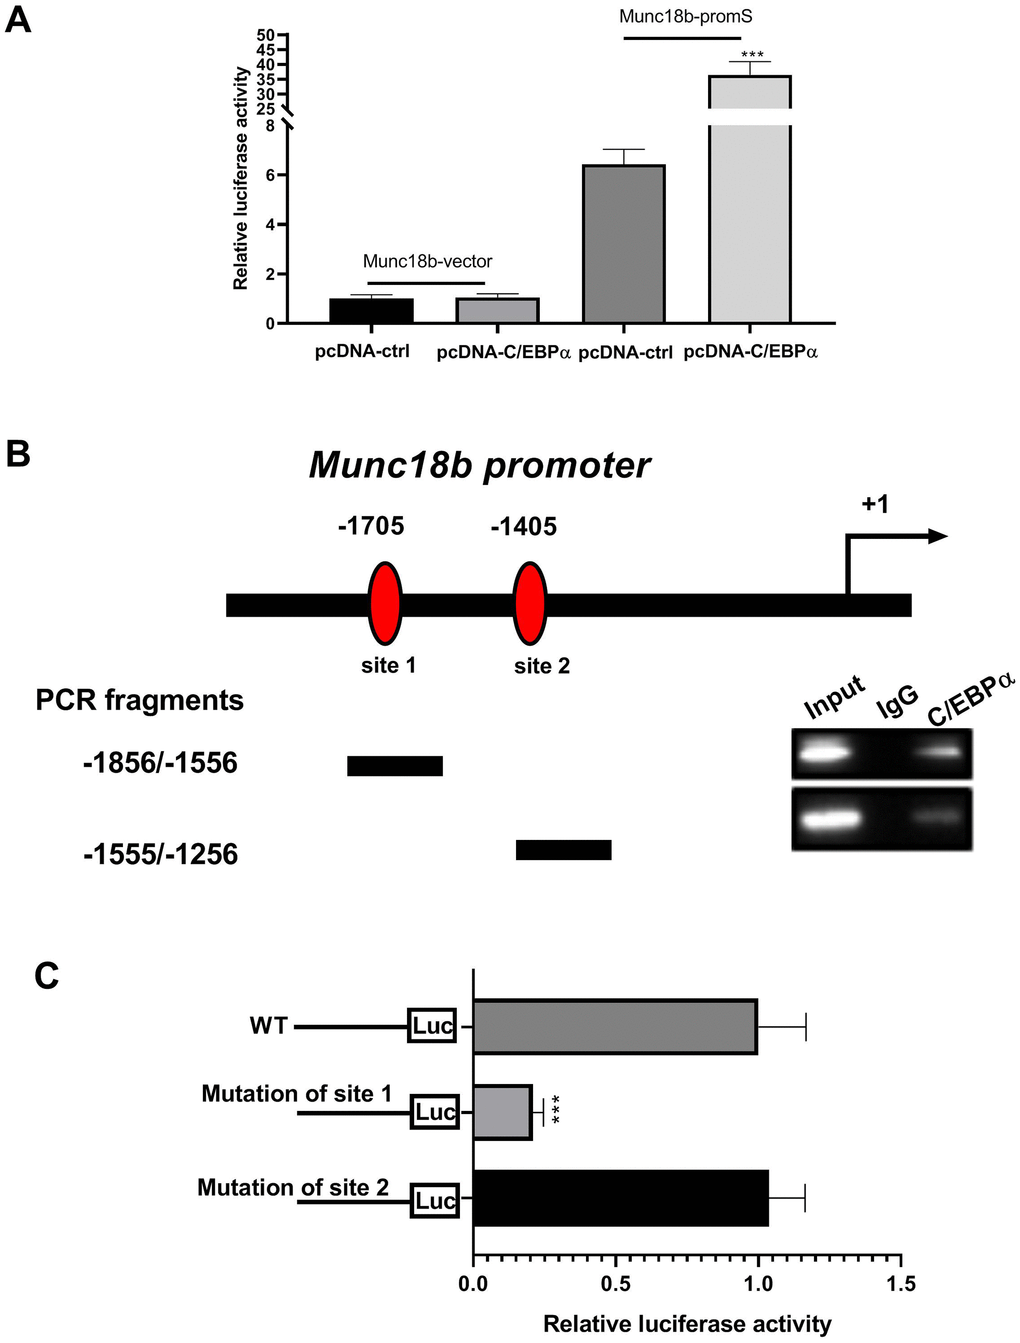 C/EBPα can directly bind to the promoter region of Munc18b. (A) CC16+ cells are transfected with both Munc18b promoter (-2000/200; Munc18b-promS) or empty pGL3-basic vector (Munc18b-vector) and C/EBPα plasmid or its corresponding empty vector control for 48 h, and then the cells are collected for luciferase activity detection. (B) ChIP assay is conducted in CC16+ cells with the anti-C/EBPα antibody. Interaction sites are identified by PCR for two possible C/EBPα binding sites in the Munc18b promoter. (C) Munc18b promoter with wild-type (WT) or mutation of the binding motif 1 or 2, and C/EBPα plasmid are co-transfected into CC16+ cells used in the luciferase assay. ***P 